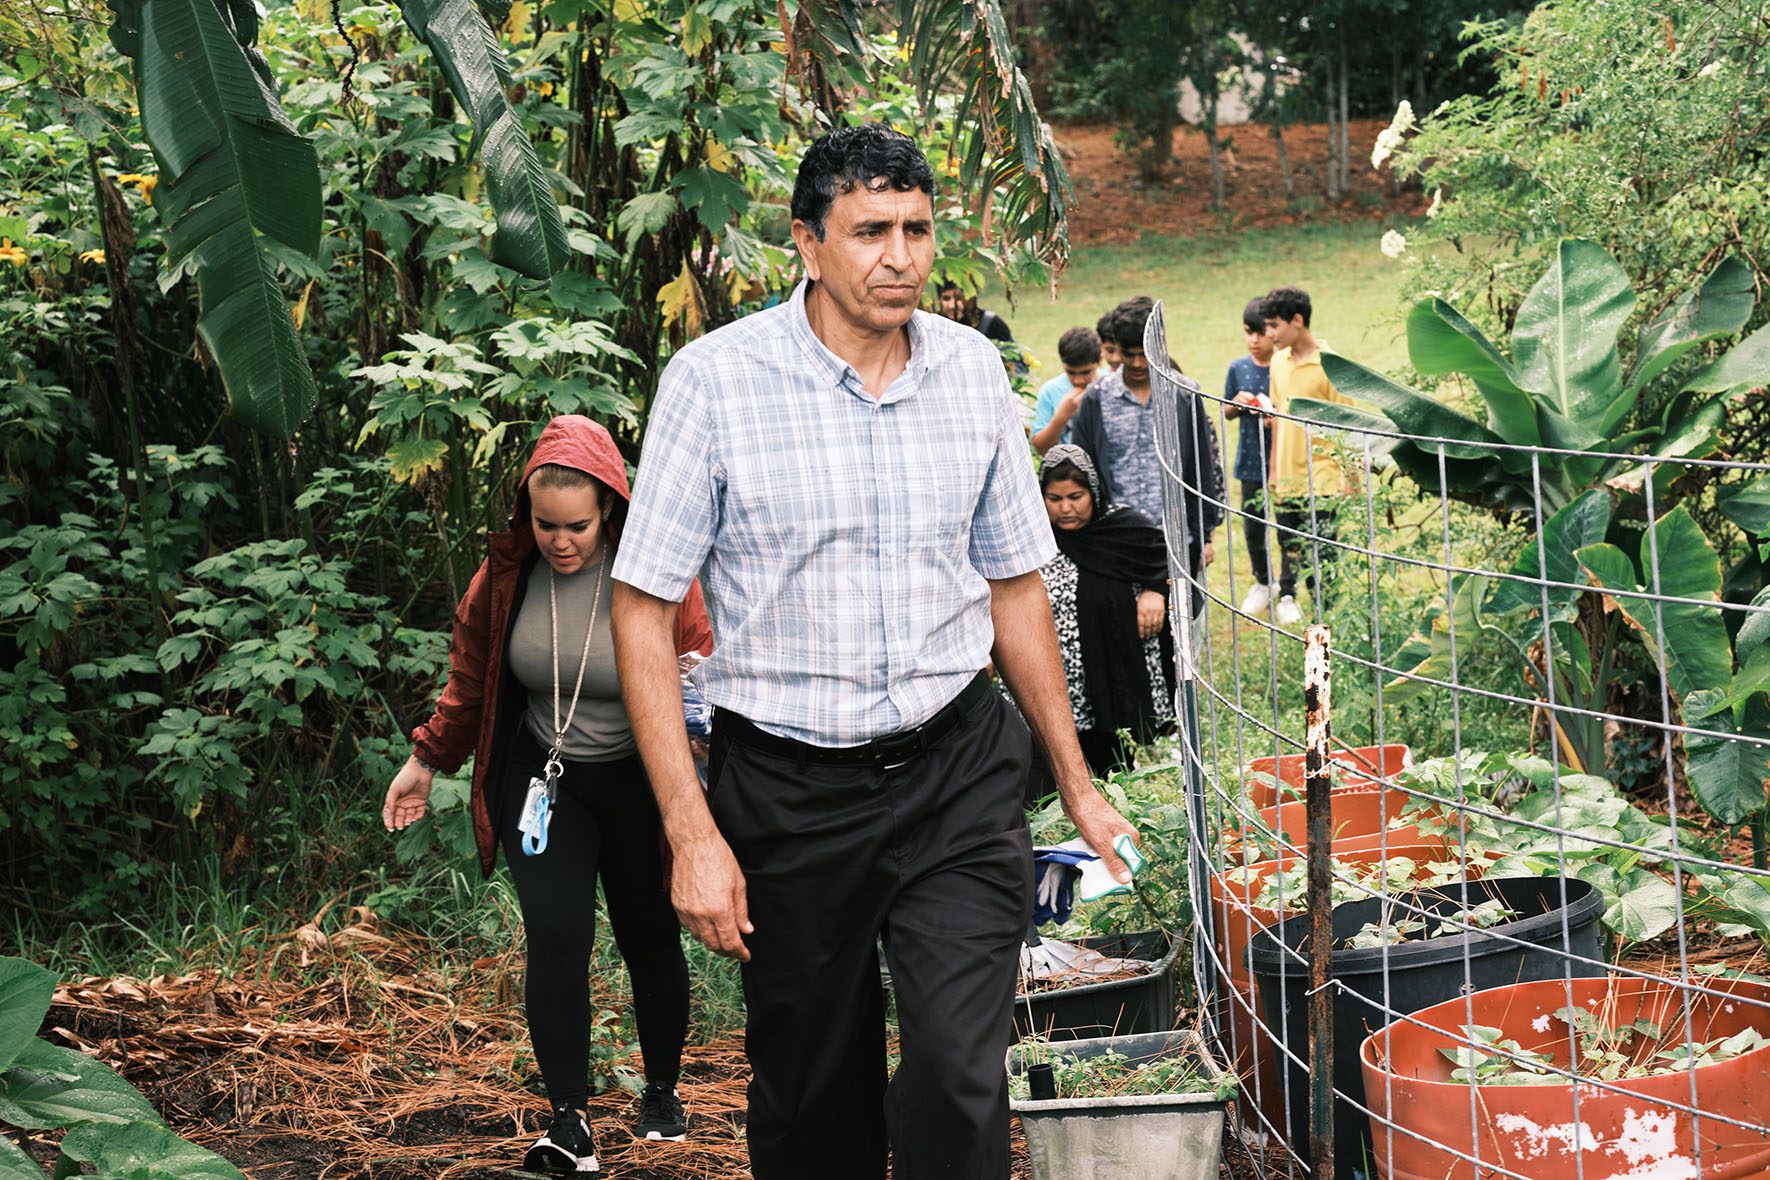 Rahmatullah Hamkar, an Afghan evacuee who was resettled by Gulf Coast JFCS, leads a group of other refugees in clearing land for their community garden on June 1, 2023 at the Gulf Coast JFCS Refugee Garden in Clearwater, Florida. | Community Garden for Refugees Offers Belonging & a Taste of Home | HIAS